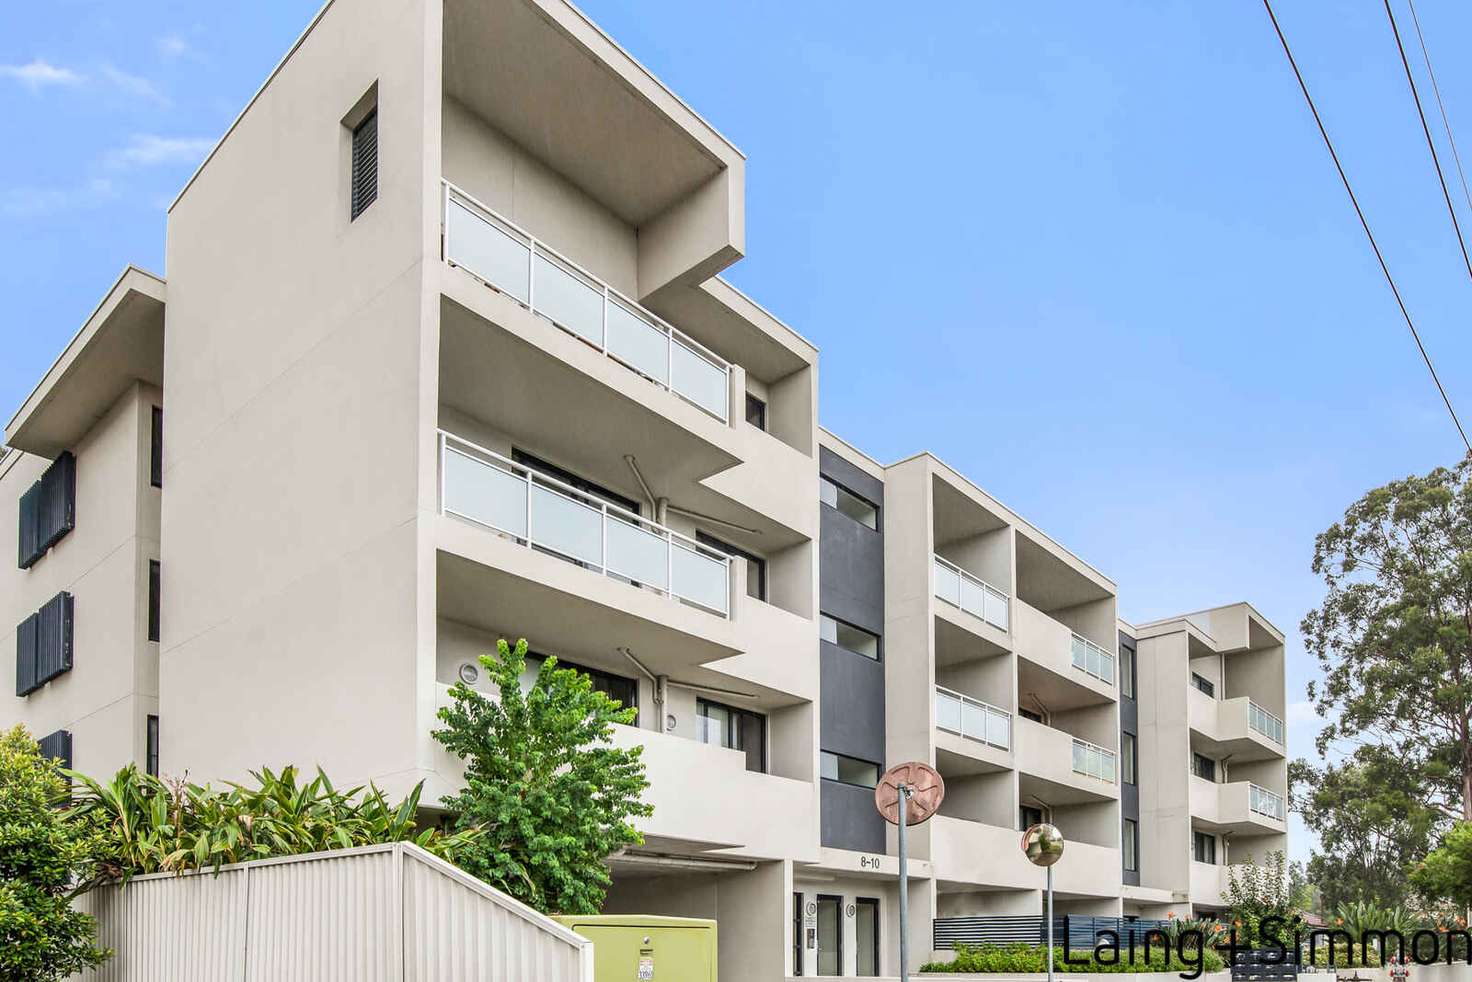 Main view of Homely unit listing, 25/8-10 Octavia Street, Toongabbie NSW 2146